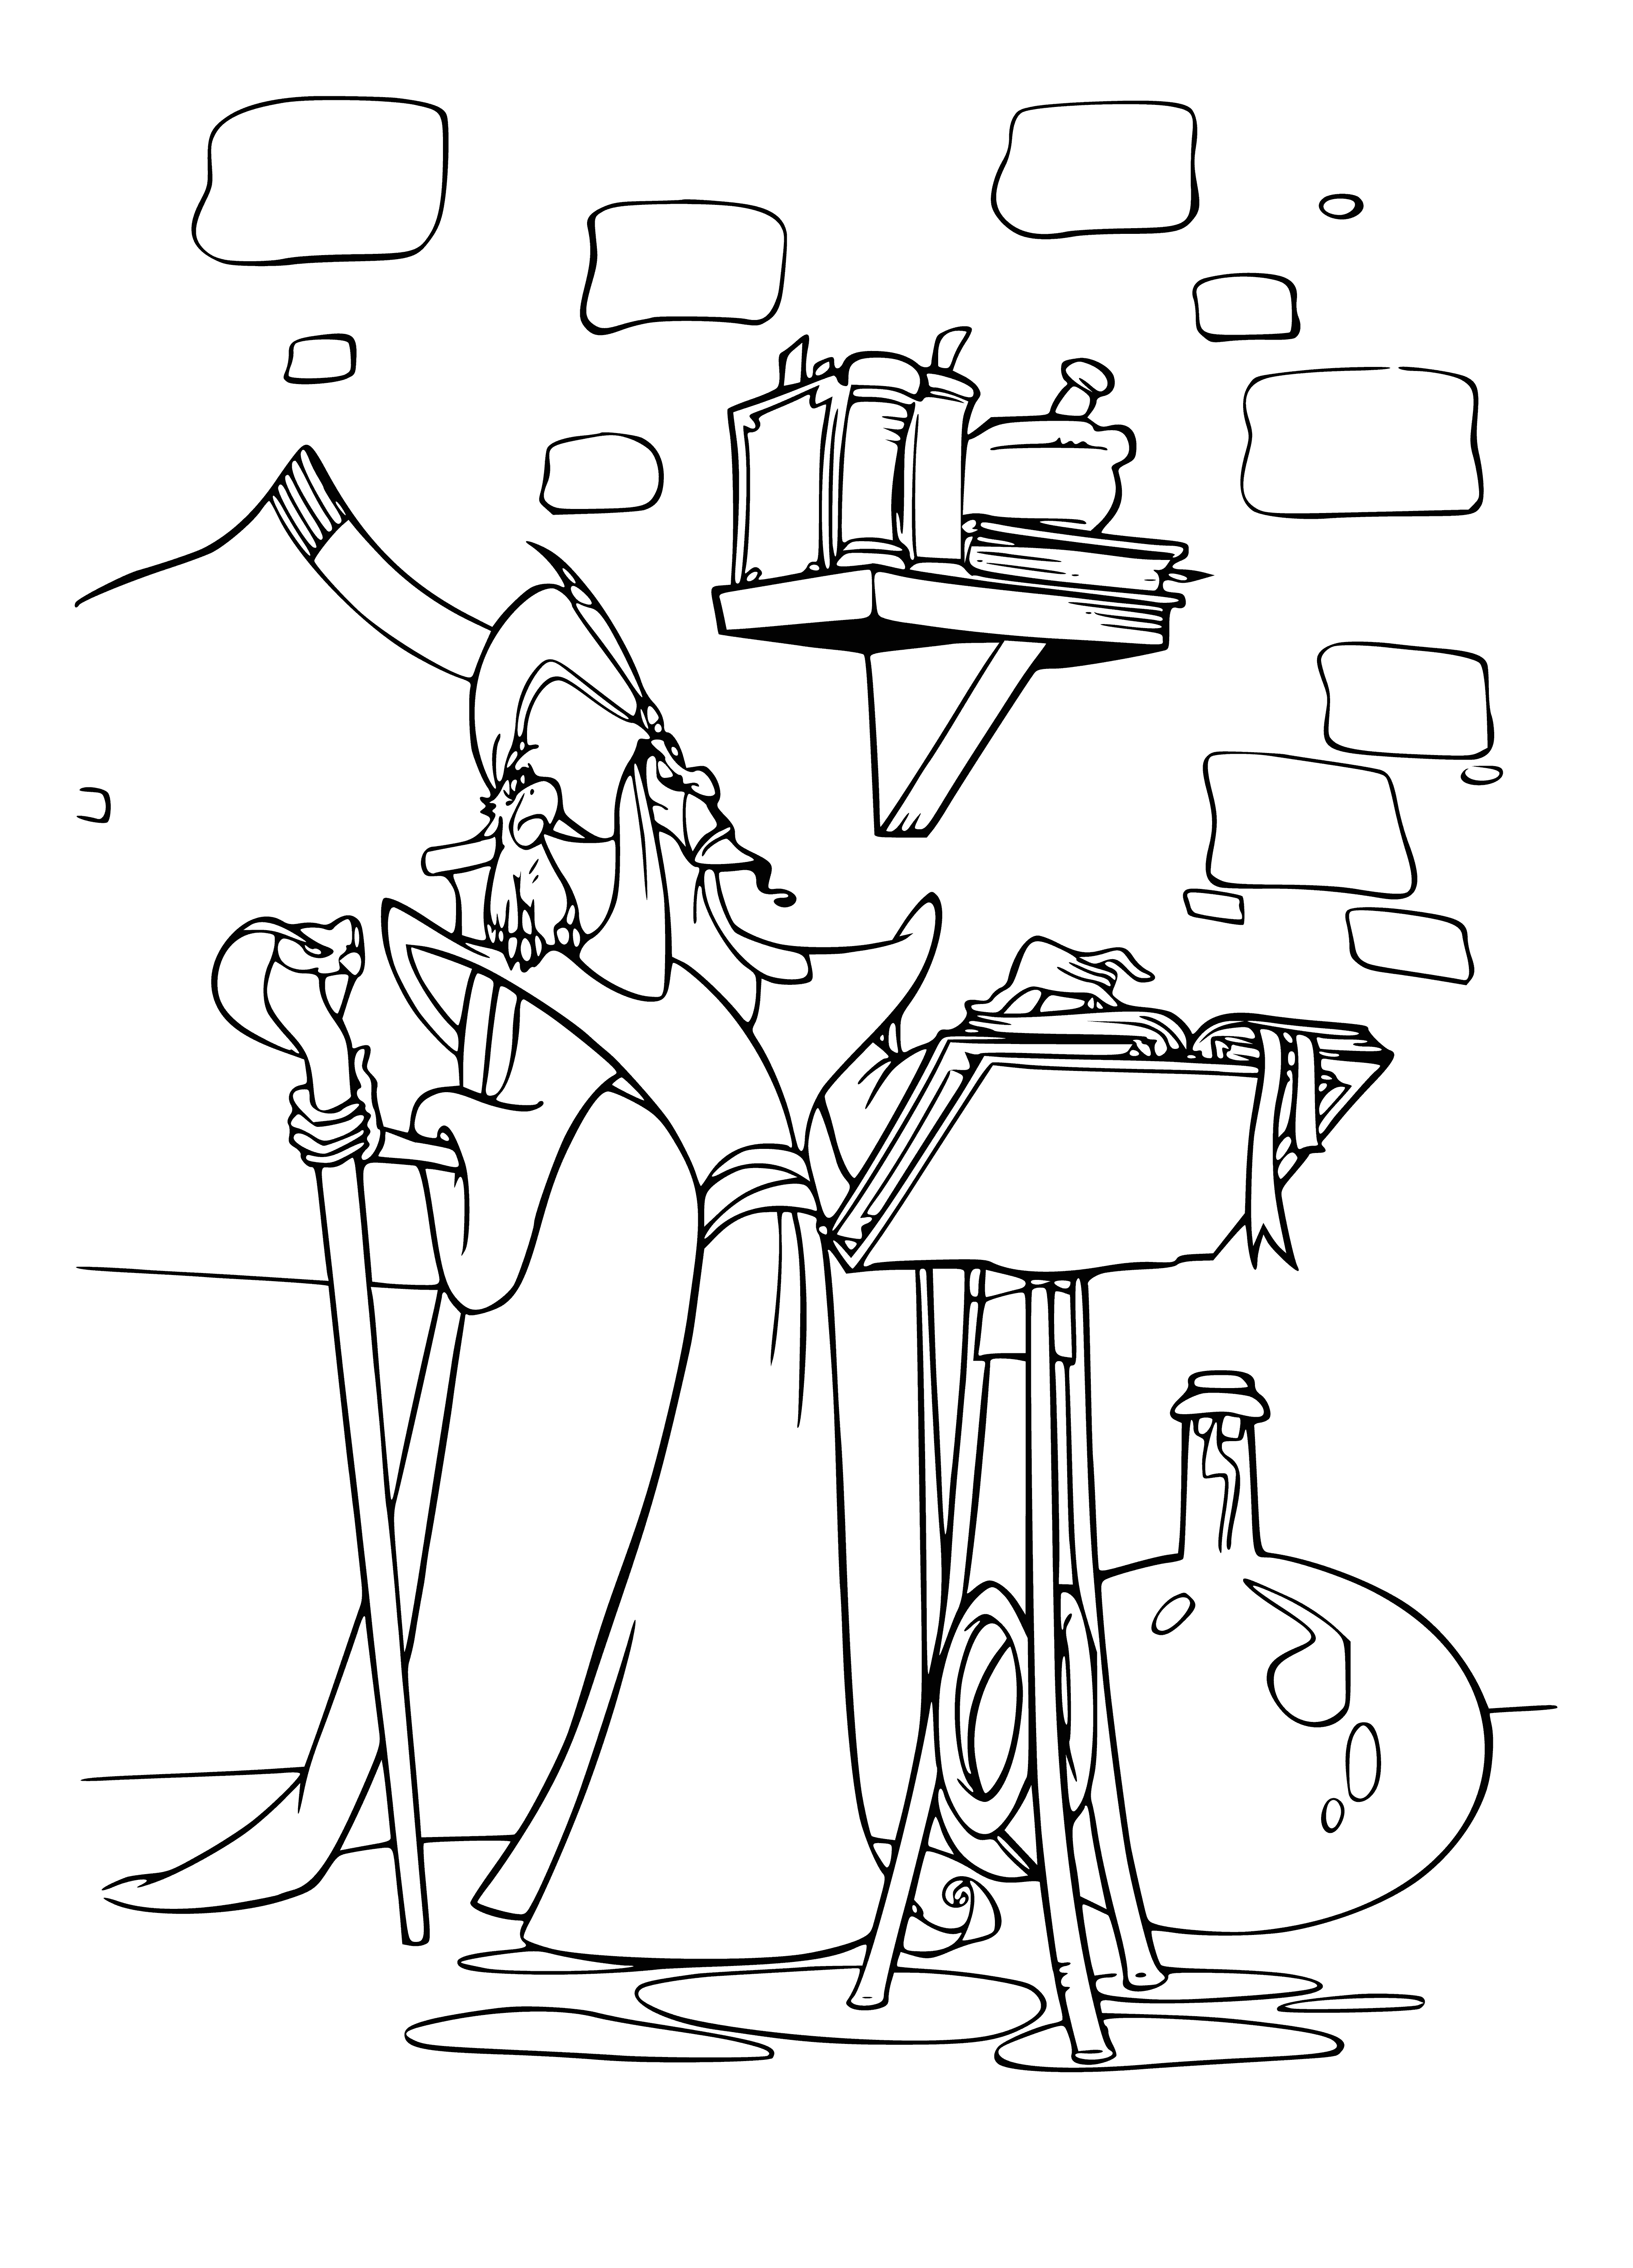 Jafar and parrot Iago coloring page